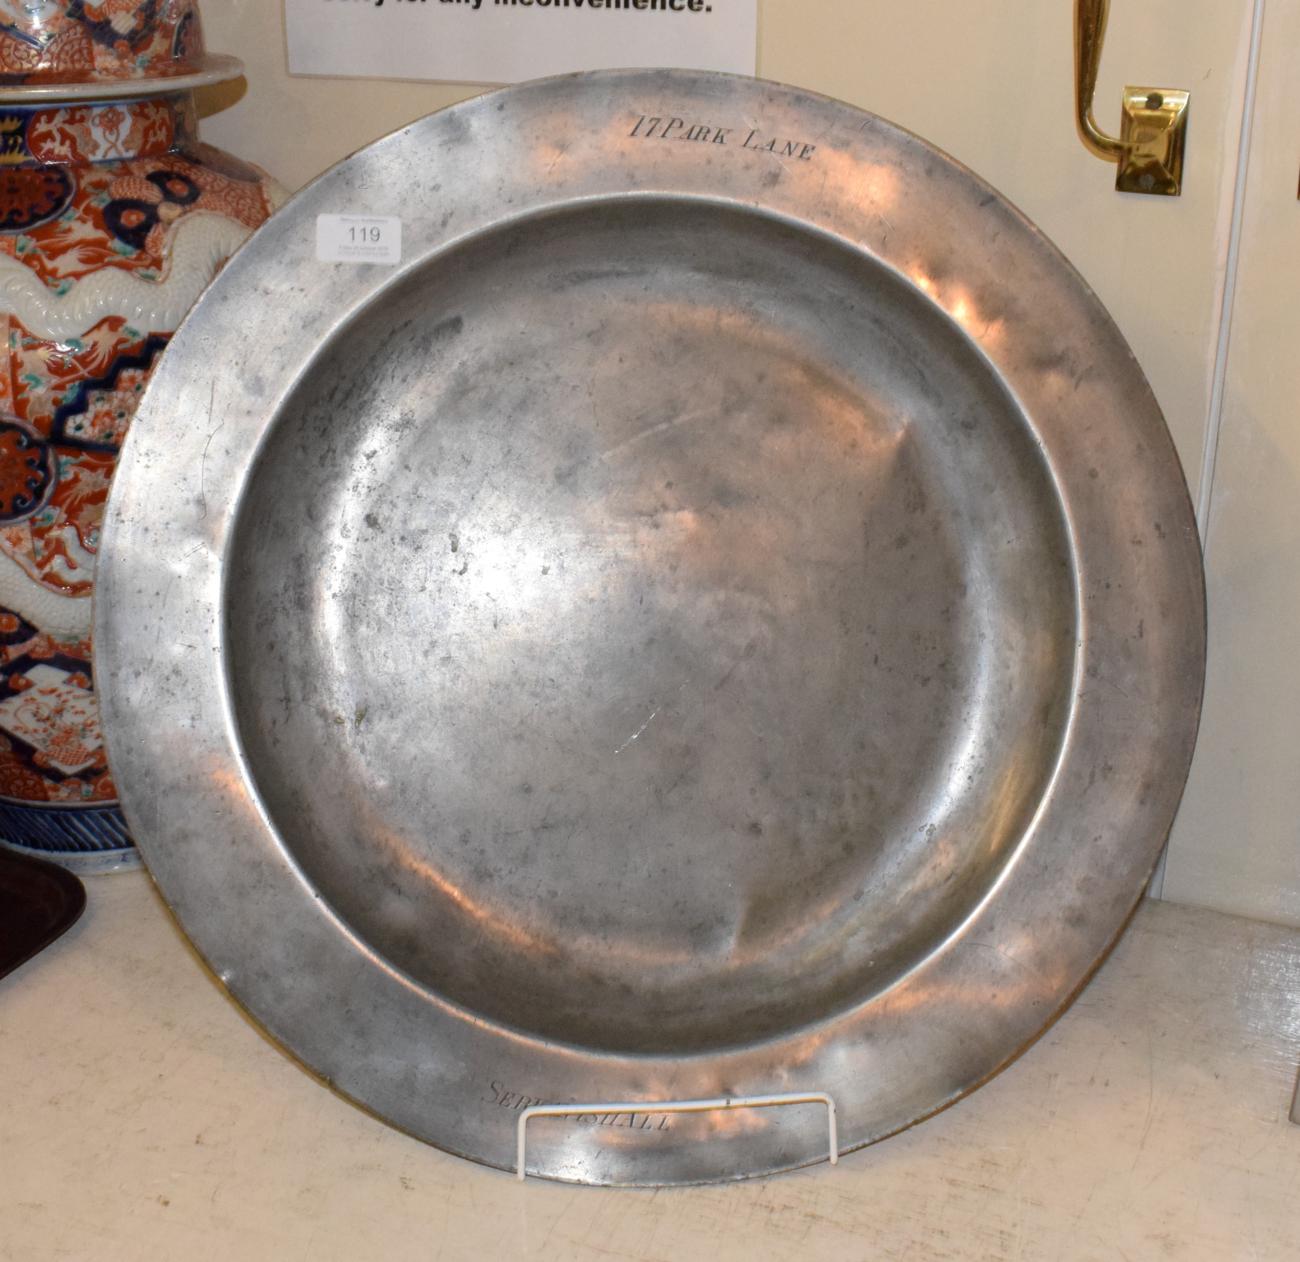 Lot 119 - A pewter dish, engraved 'Servants Hall 17 Park Lane', late 18th century